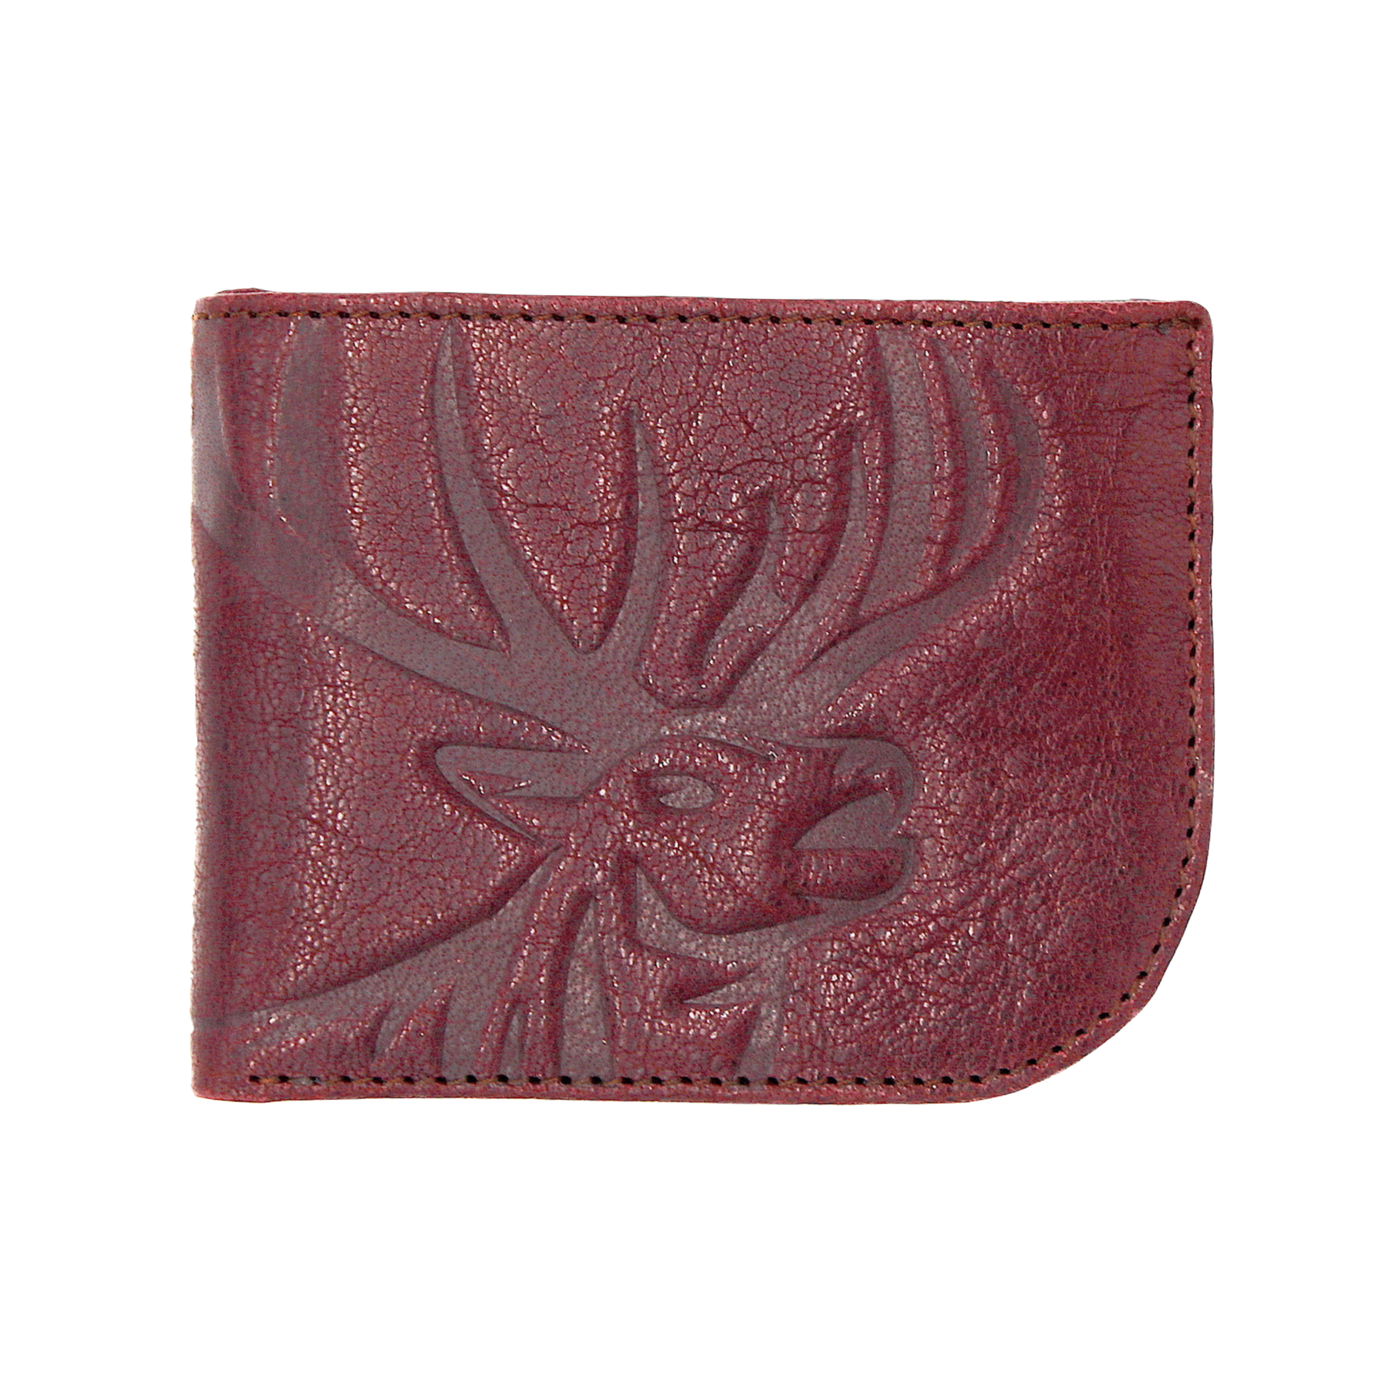 The Pursuit Bifold Radius Elk Wallet embodies the spirit of the hunt with premier full grain leather, bold hand-dyed color, and a beautiful debossed elk logo. Ensure to get yours today! 6 Hi-Viz Interior Card Slots 2 Storage Pockets Bill Compartment Modern Style & Design Stylish Debossed Elk Radius Comfort Corners RFID Protection Color: Crimson